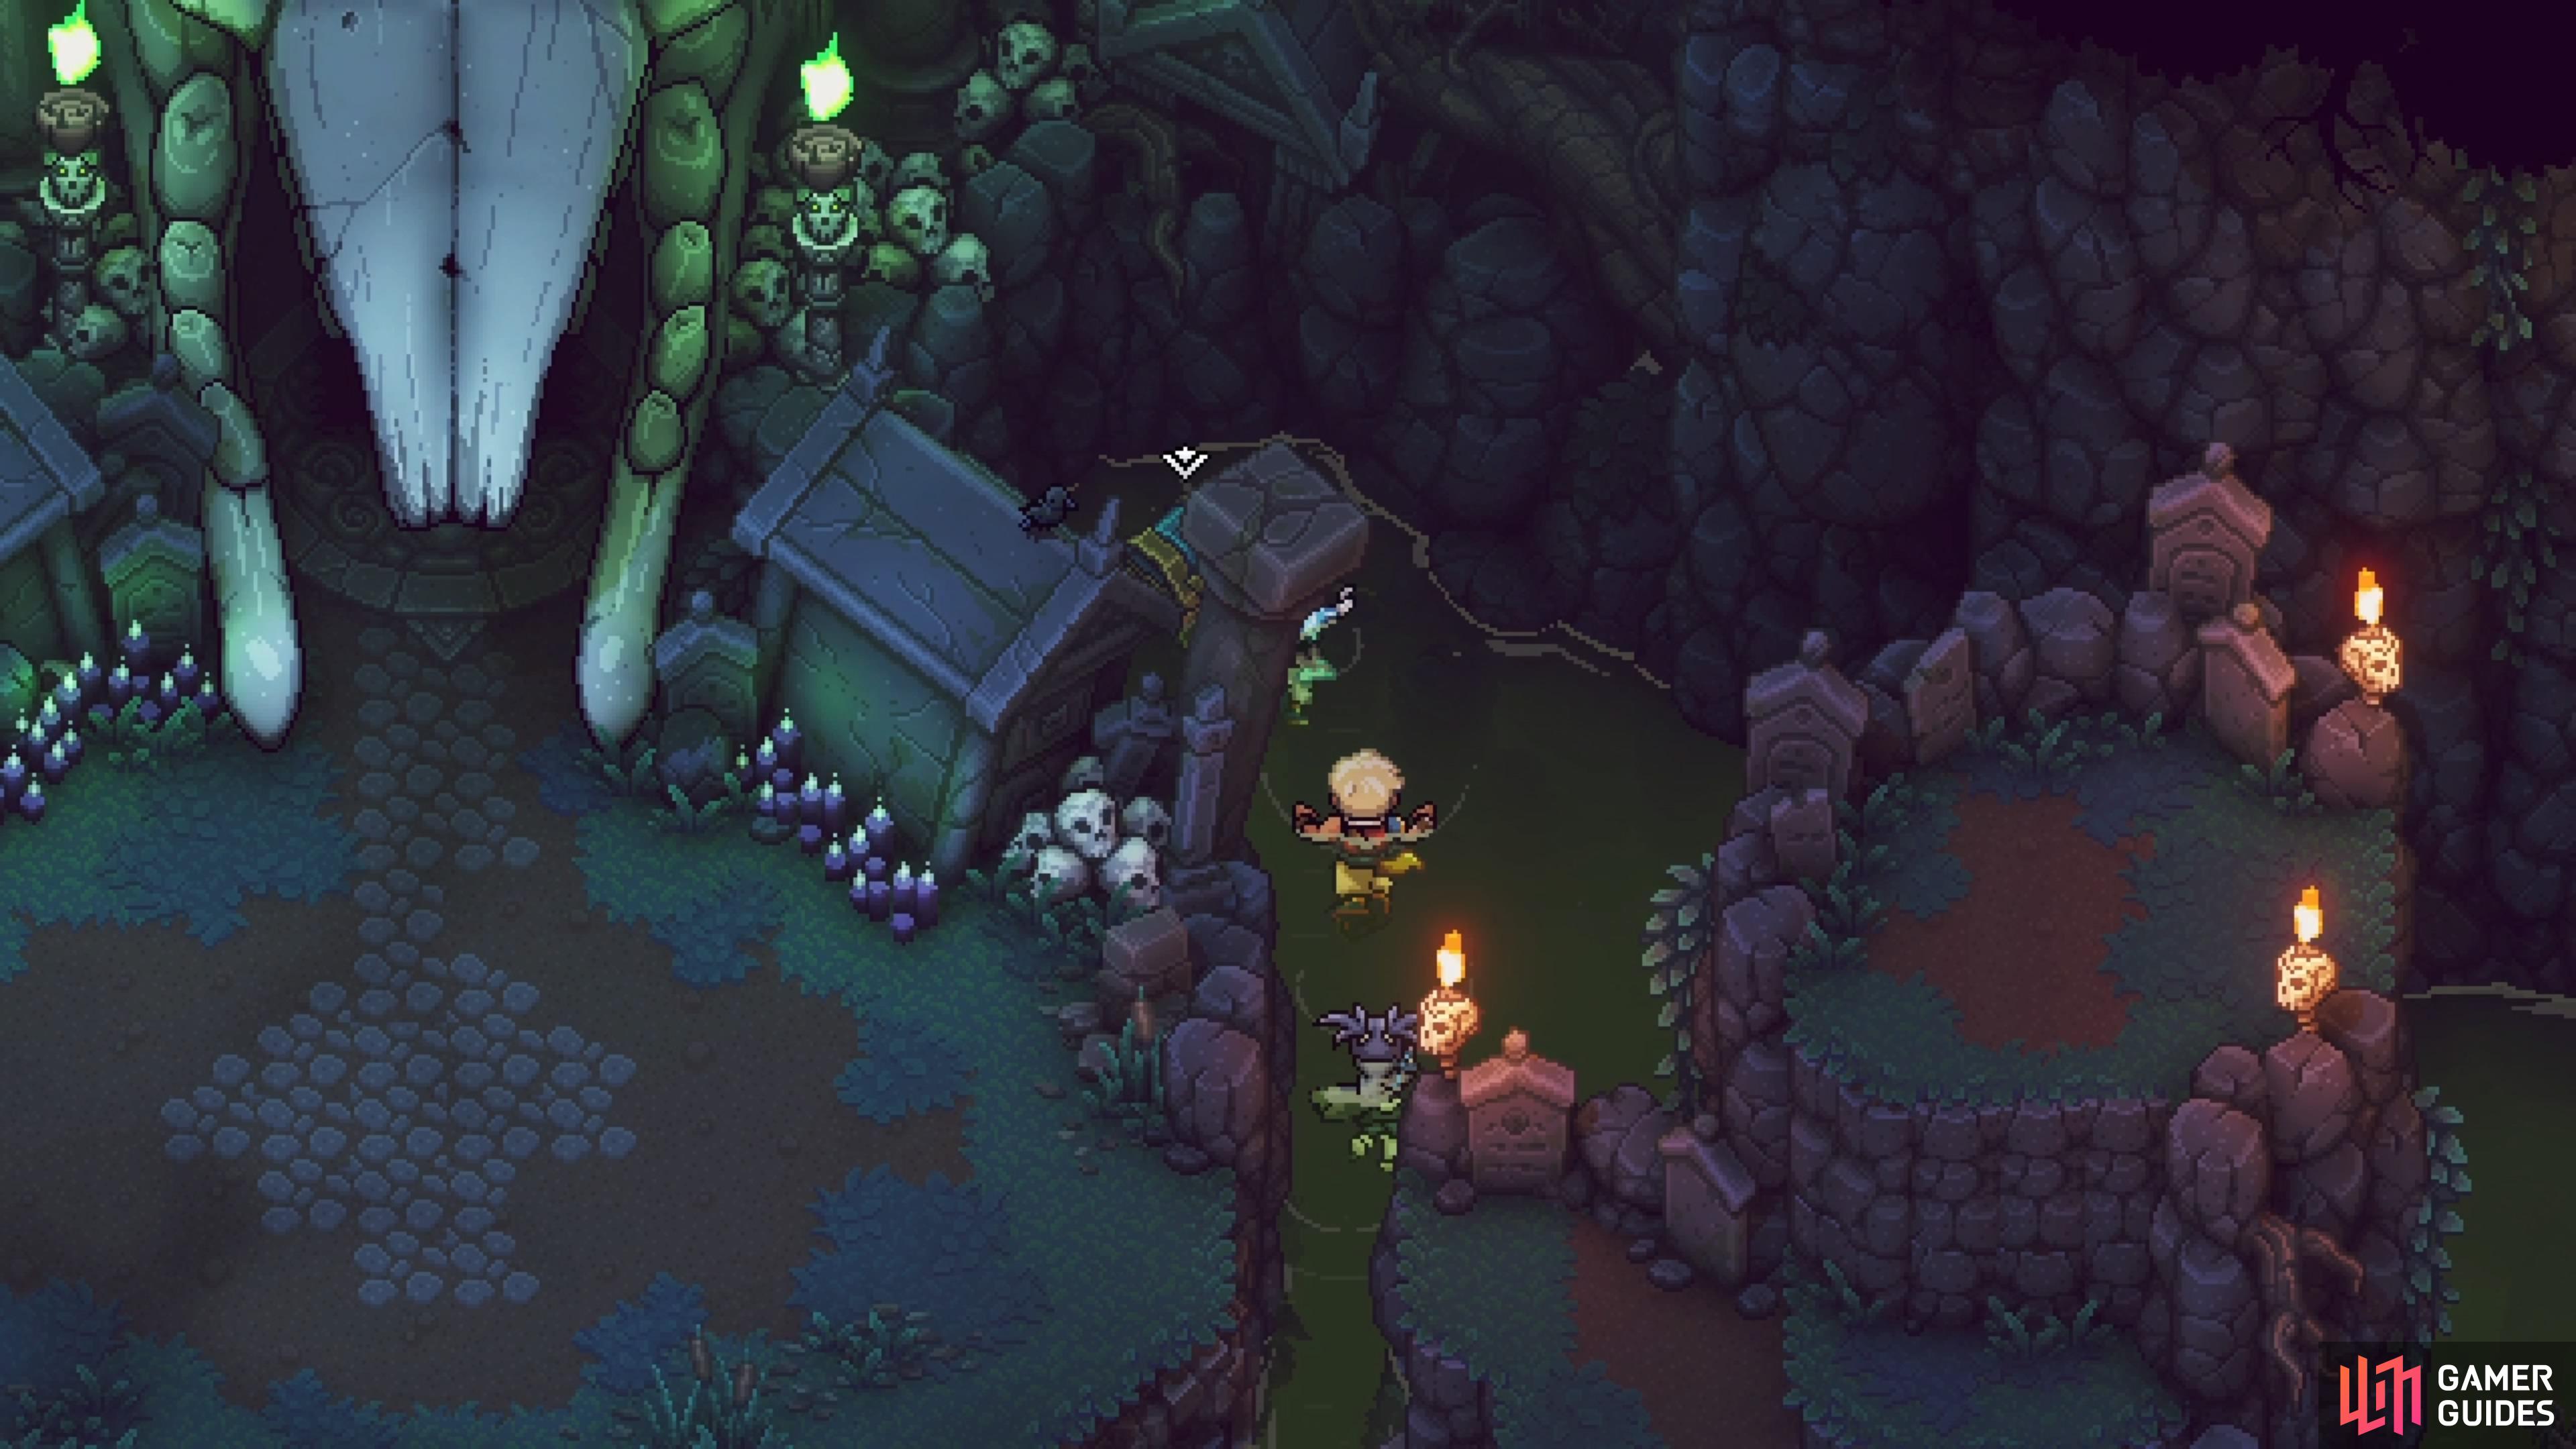 In the corner right here, to the right of the Necromancer’s Lair entrance, will be a chest with a Rainbow Conch.